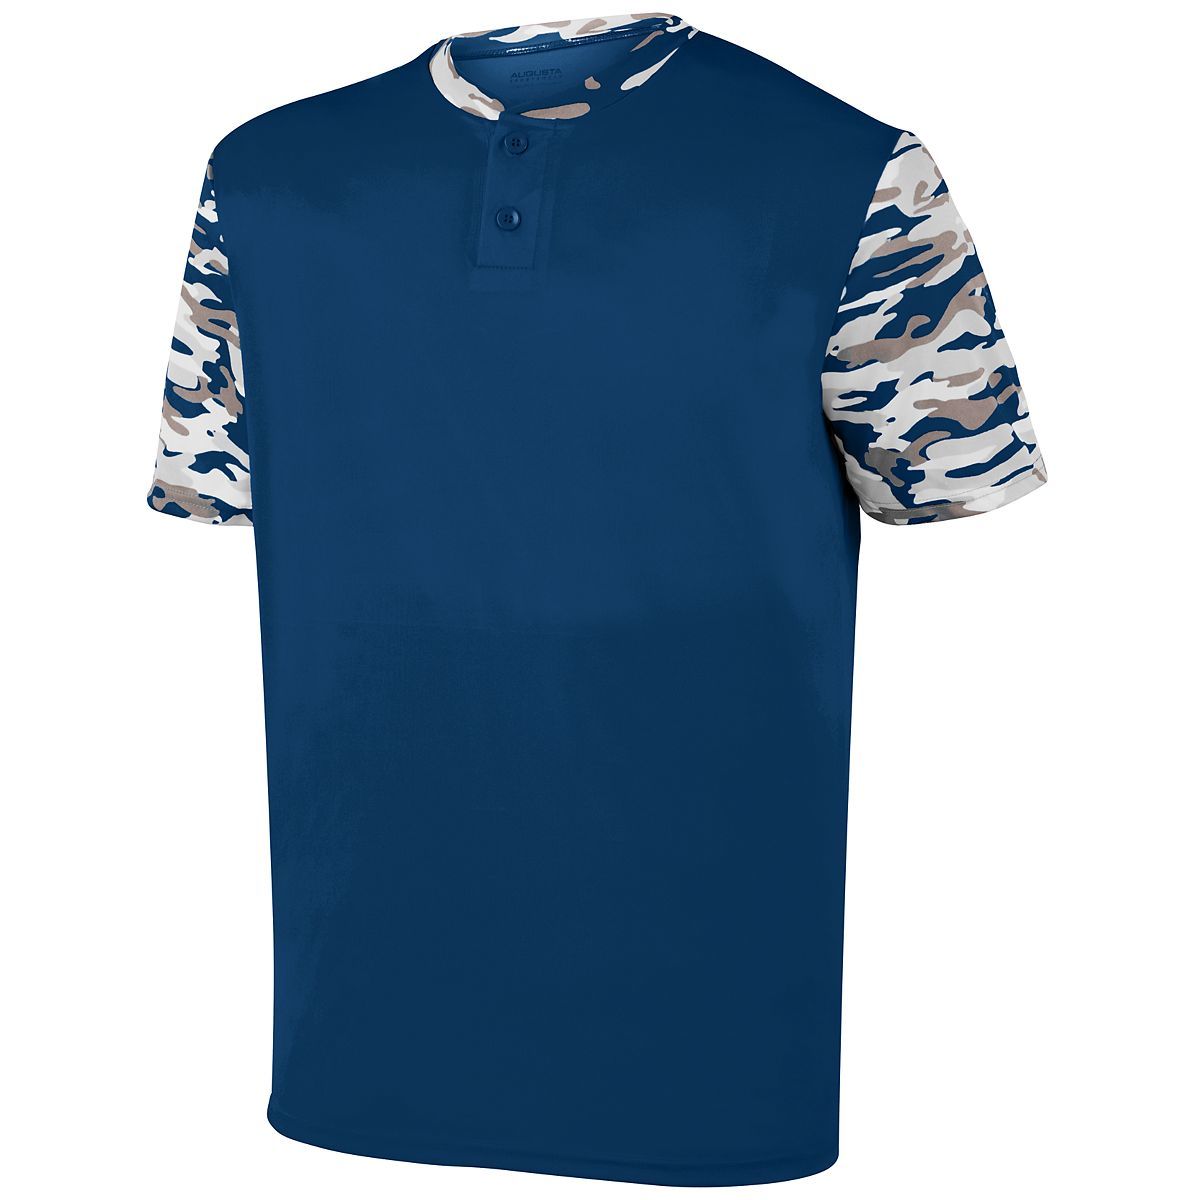 Augusta Sportswear Youth Pop Fly Jersey in Navy/Navy Mod  -Part of the Youth, Youth-Jersey, Augusta-Products, Baseball, Shirts, All-Sports, All-Sports-1 product lines at KanaleyCreations.com